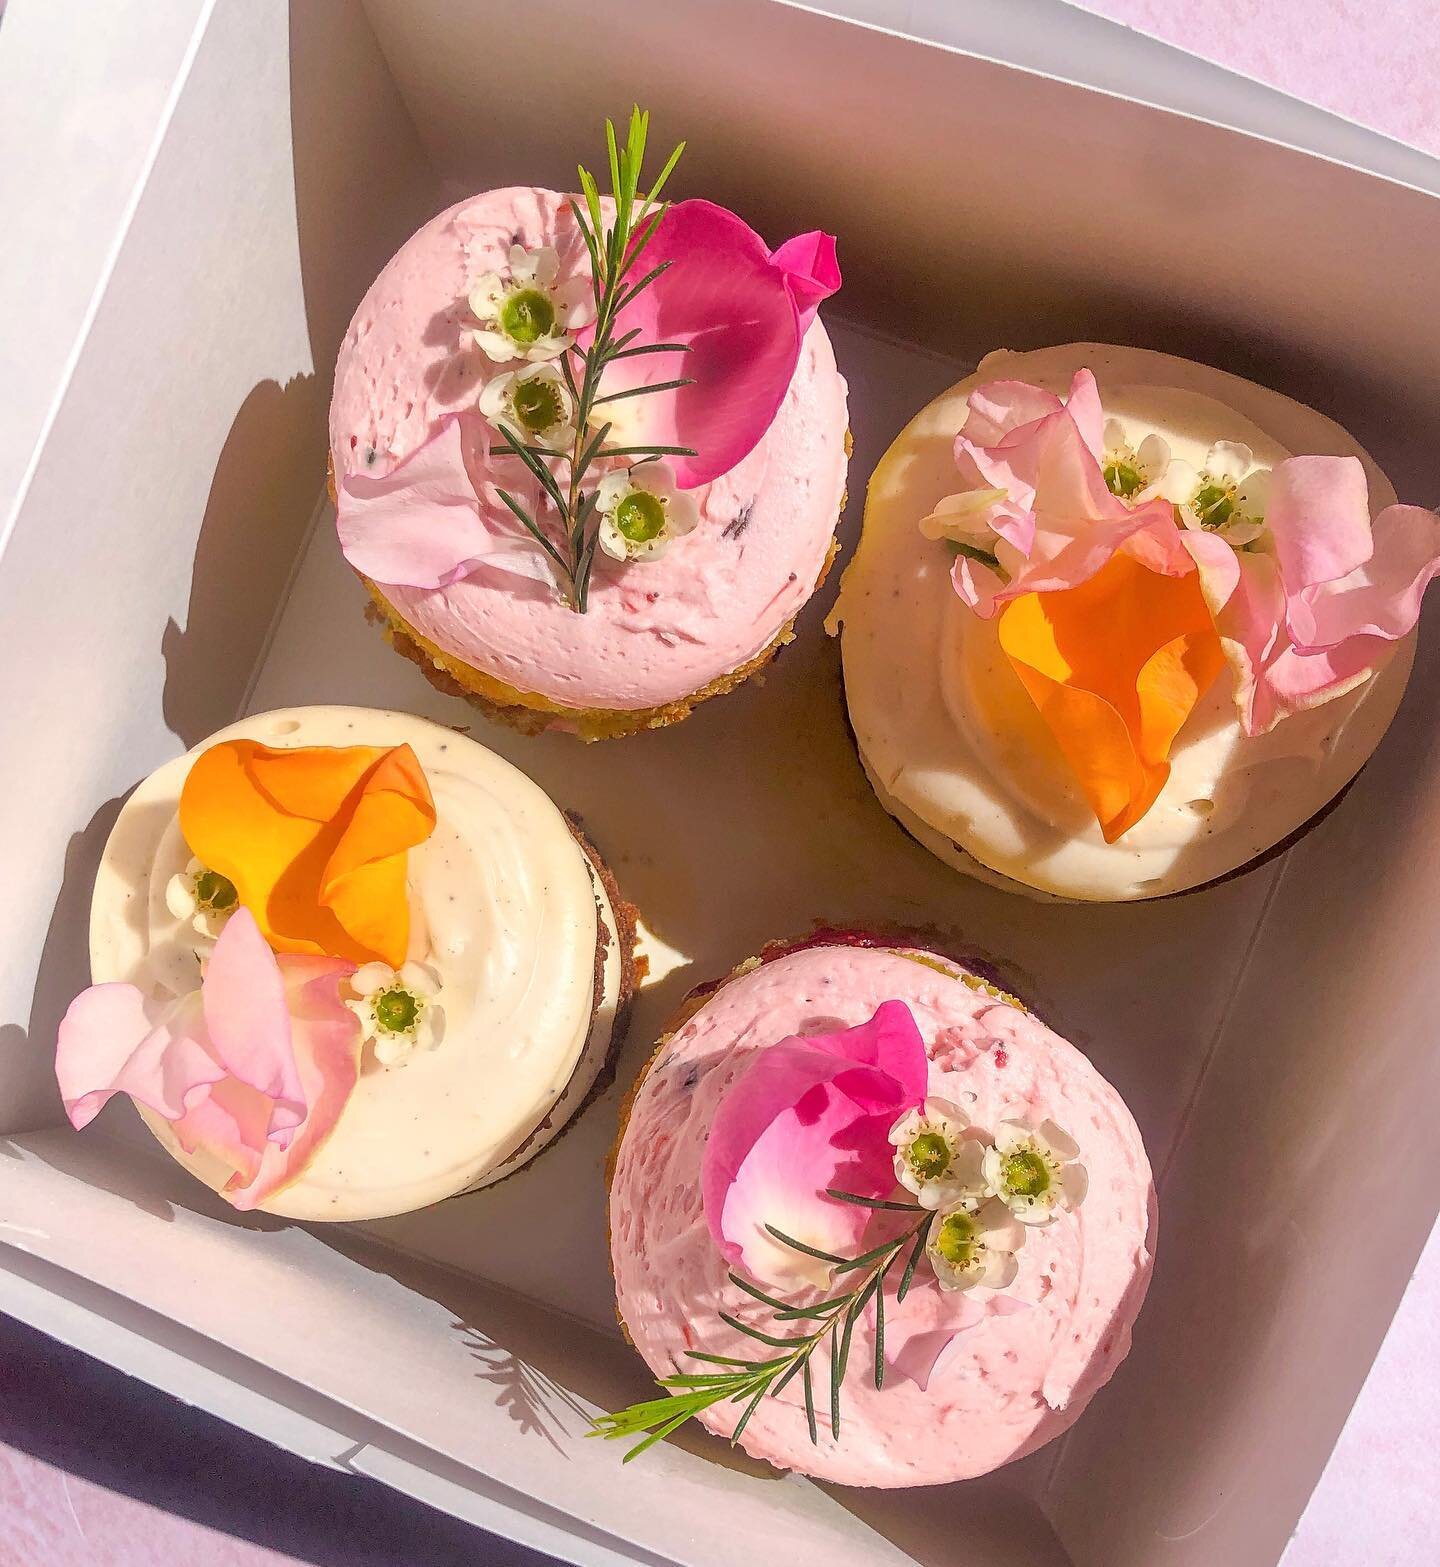 OKAY OKAY I haven&rsquo;t posted a cupcake pic in a while but that&rsquo;s only because I&rsquo;m having SO much fun making these cute lil minicakes lately! I&rsquo;ve got two flavors up on batterandbloom.com that you can order whenever&mdash;and a w